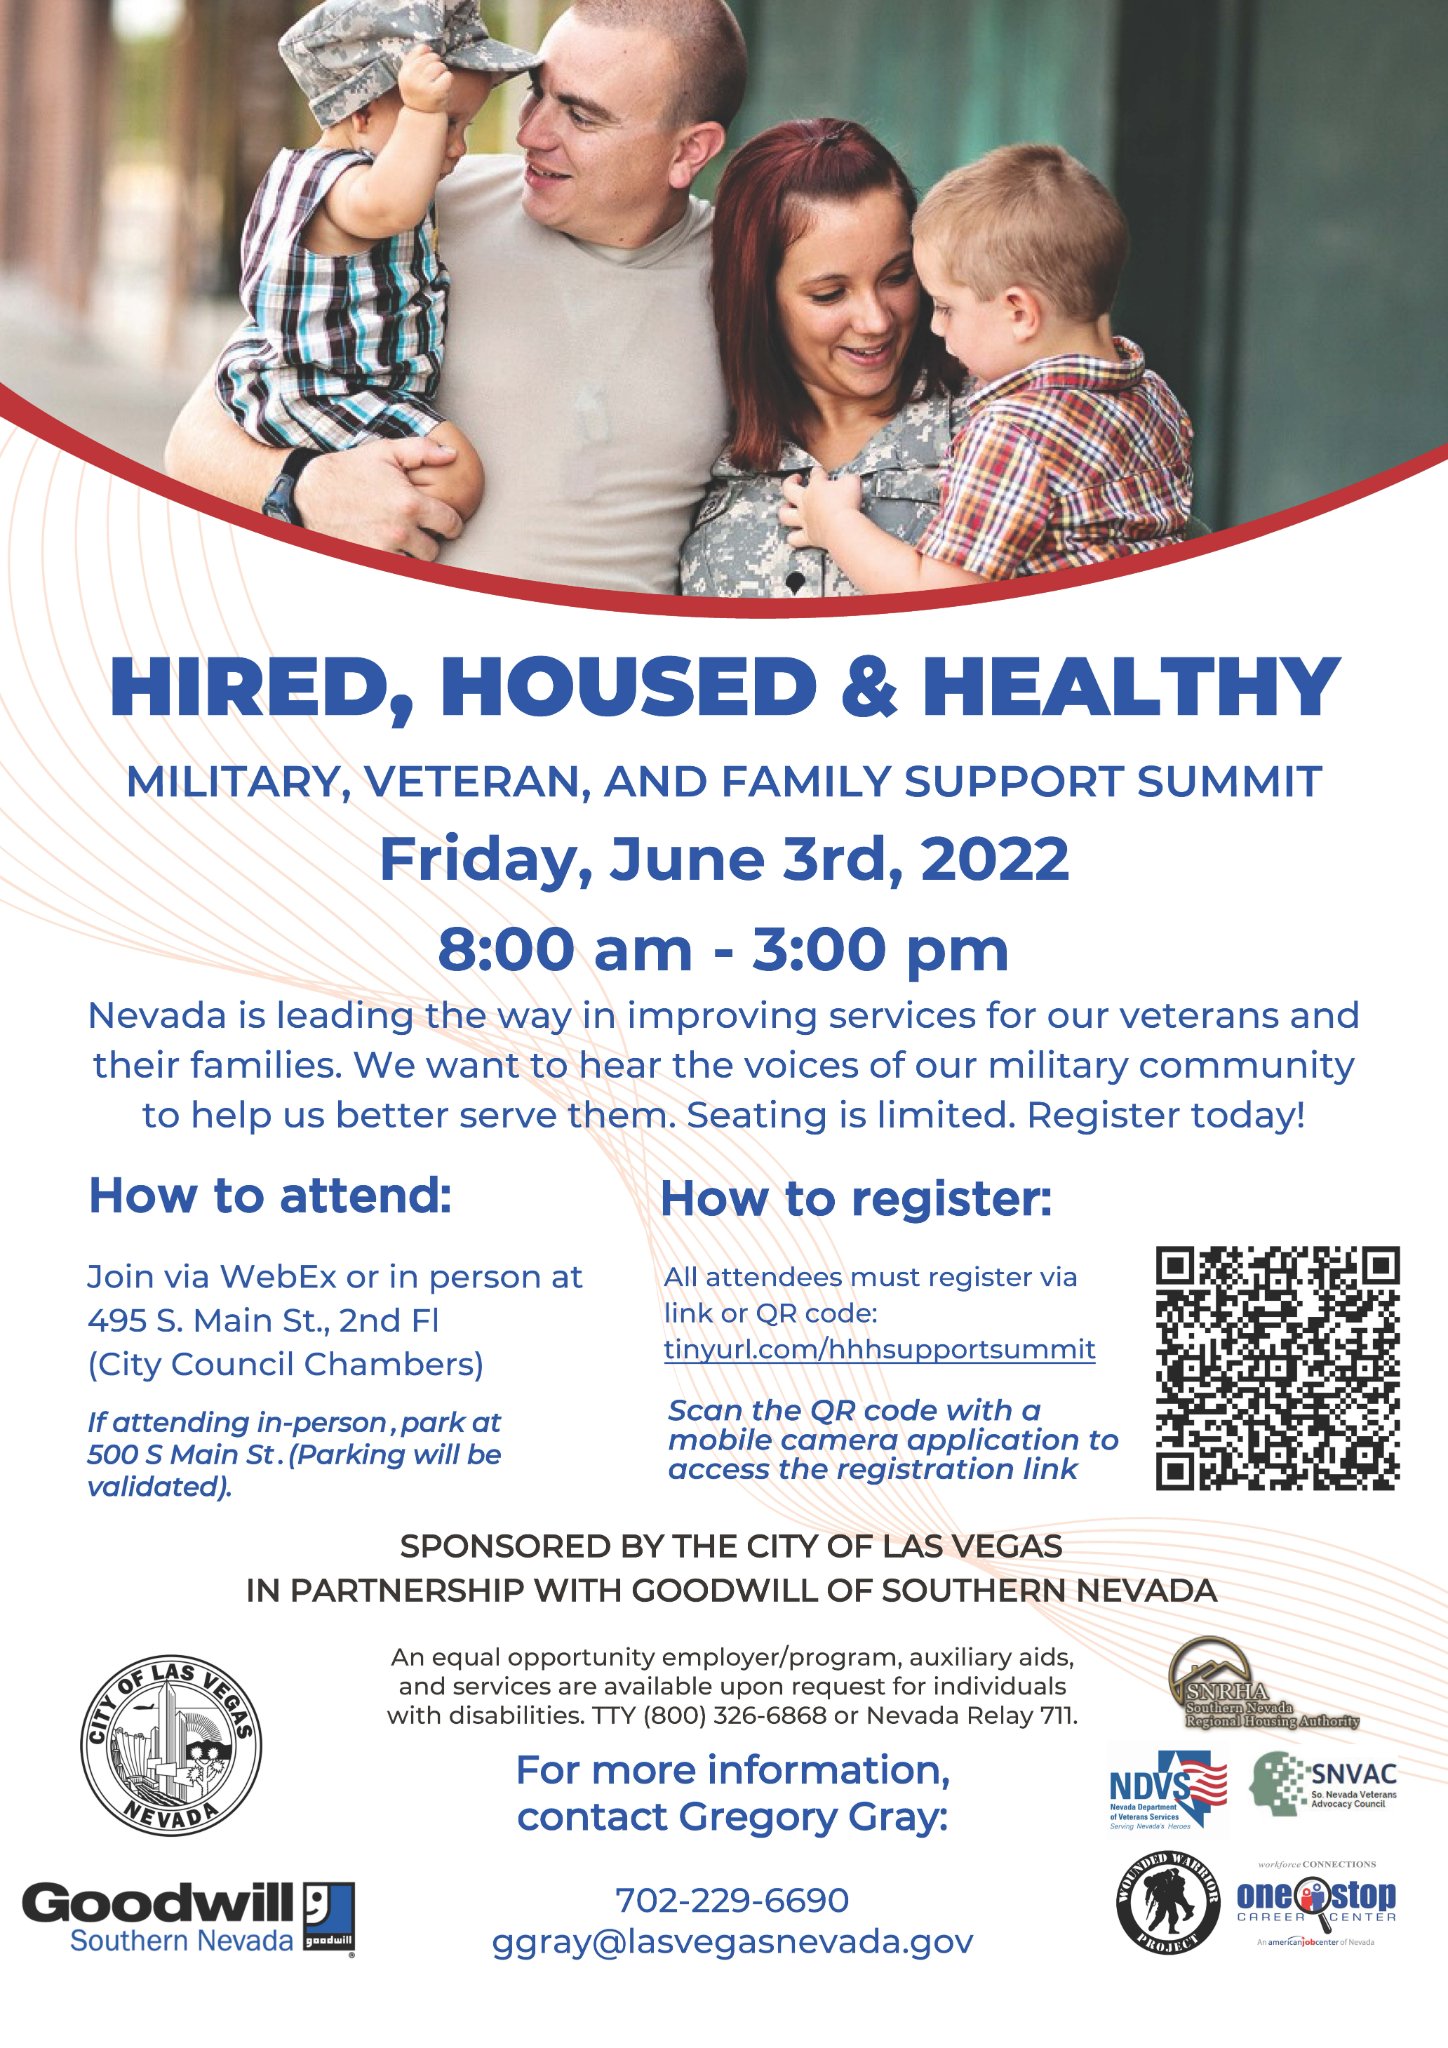 Hired, House, and Healthy Military and Veteran Family Support Summit